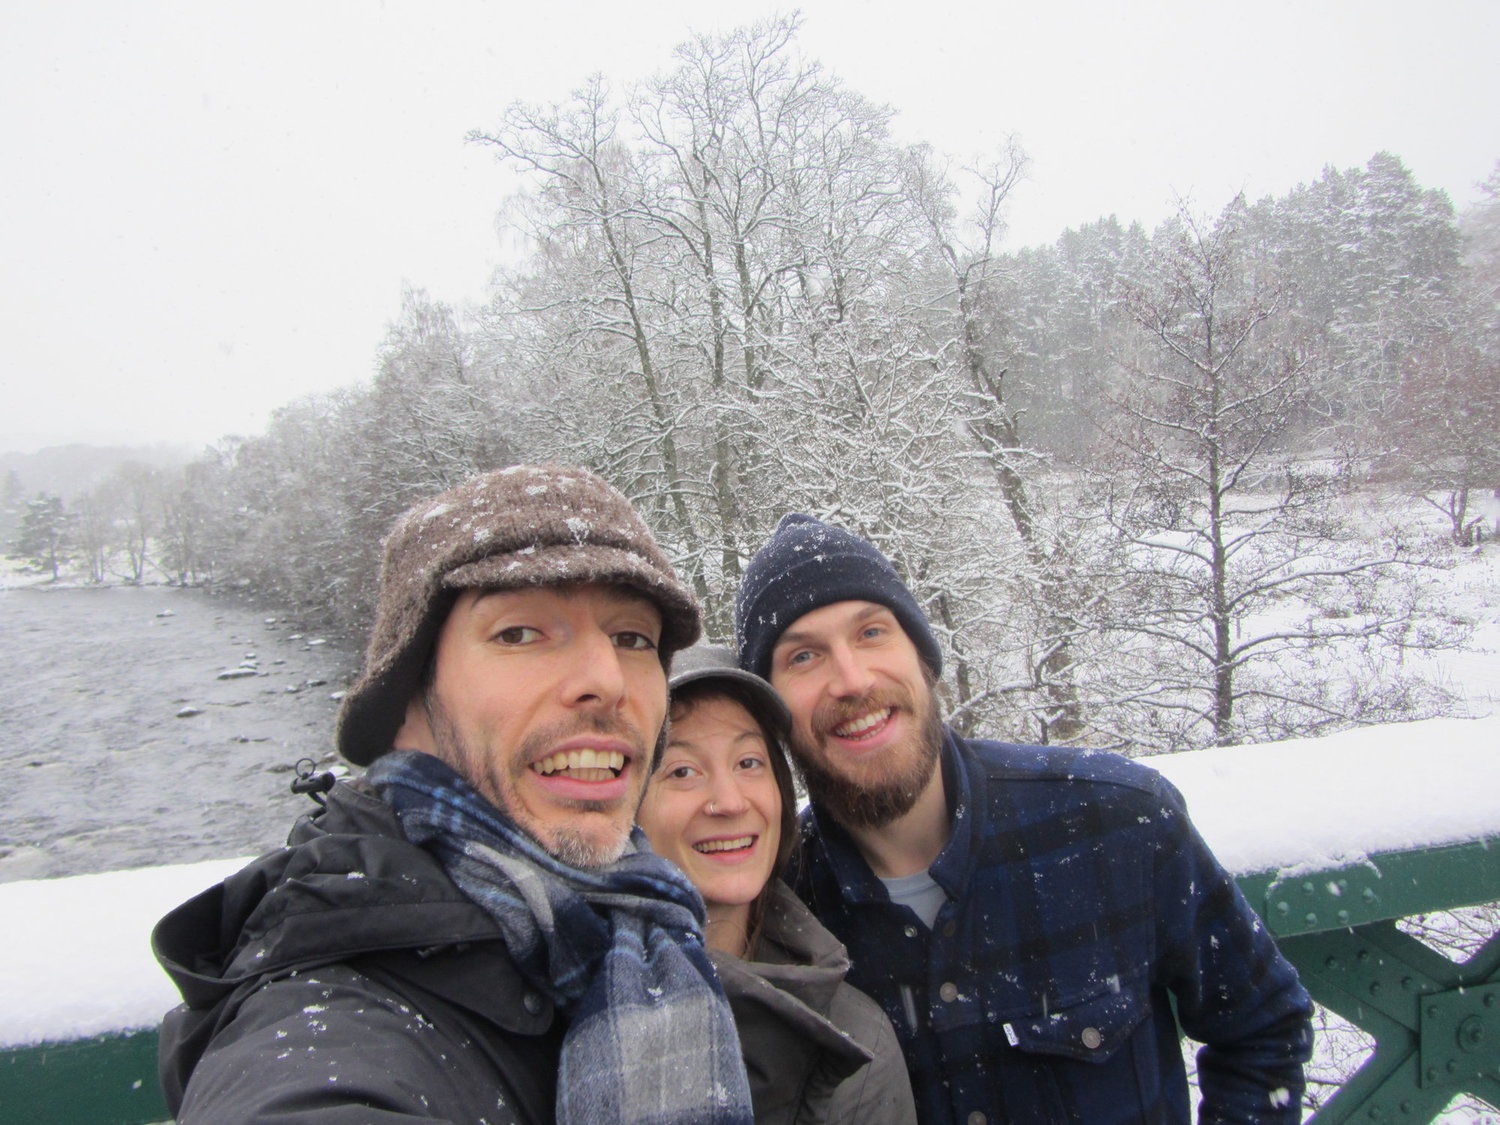 Joan, Solene and John in the snow